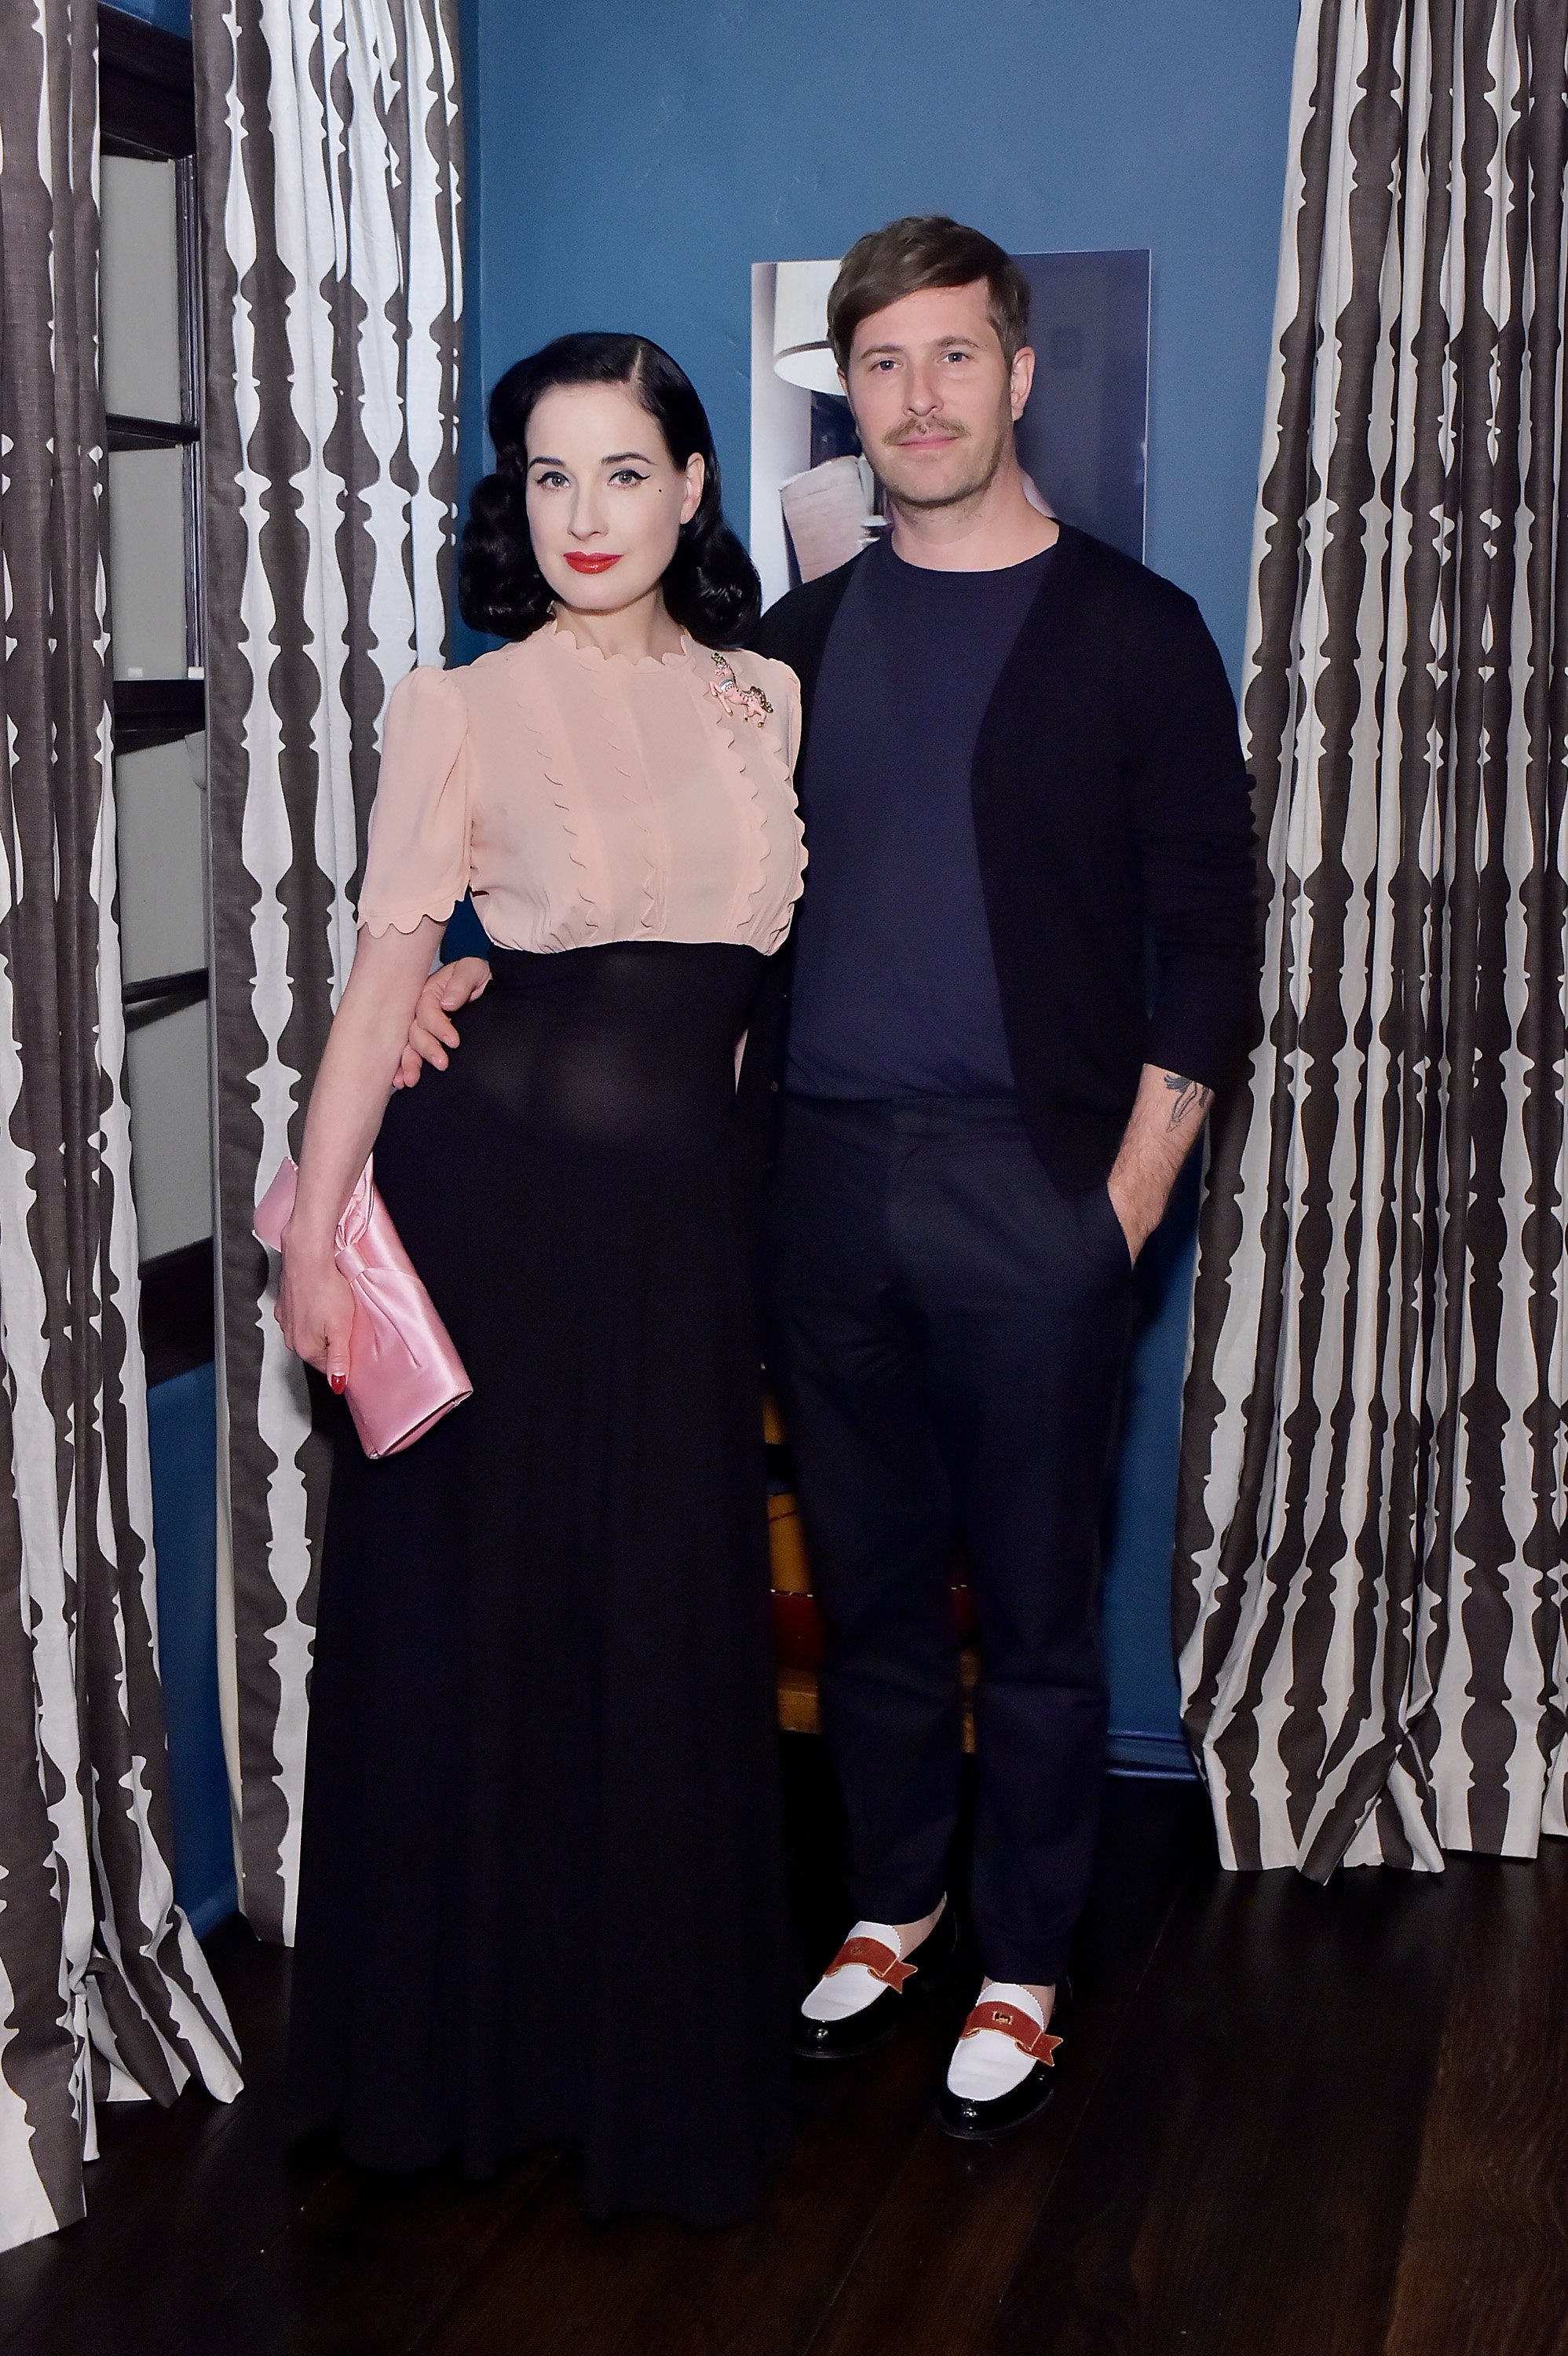 Dita Von Teese and Adam Rajcevich at a private dinner on March 29, 2018 | Source: Getty Images